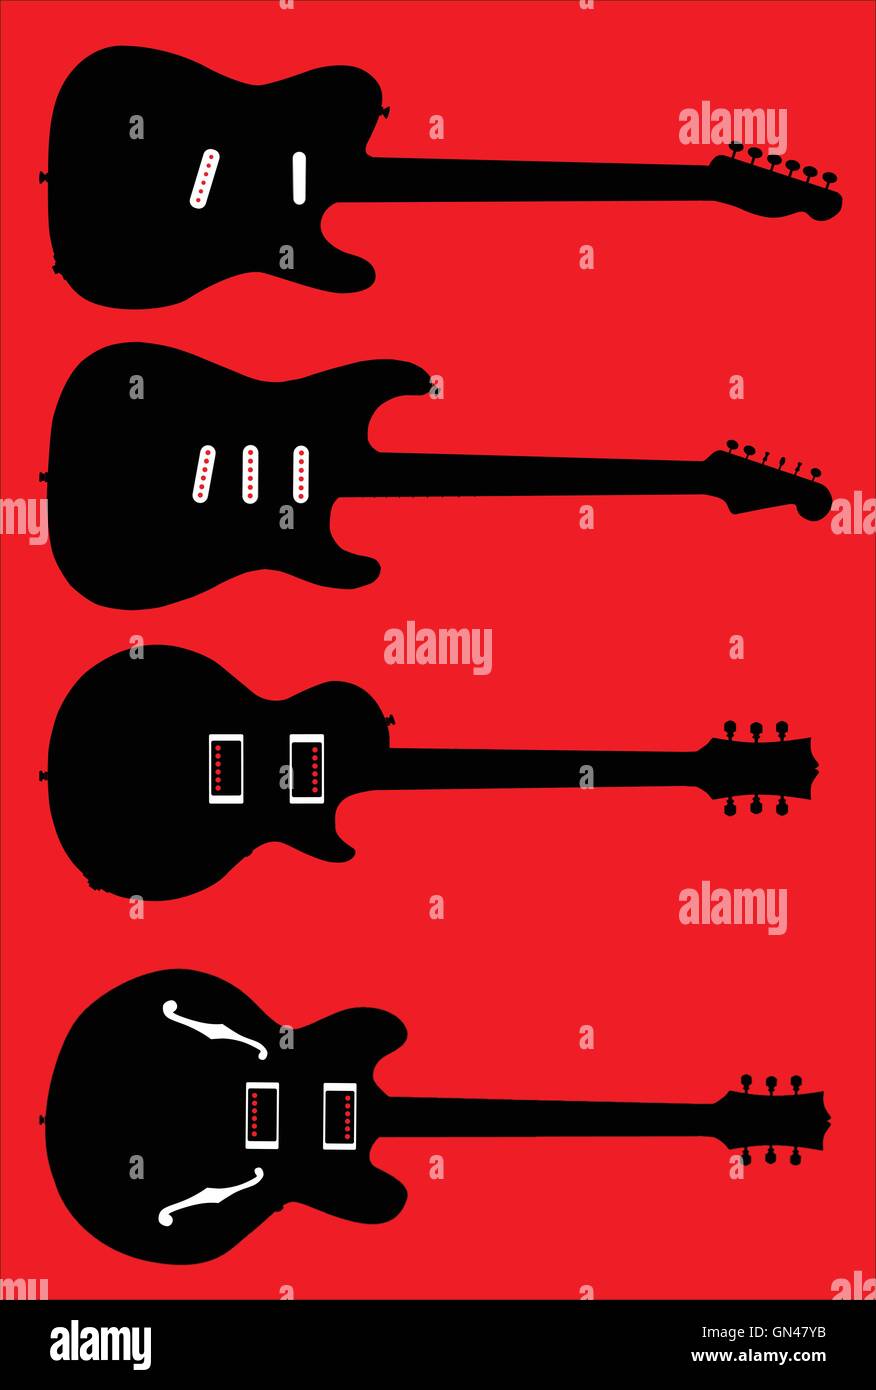 Red fender stratocaster Stock Vector Images - Alamy